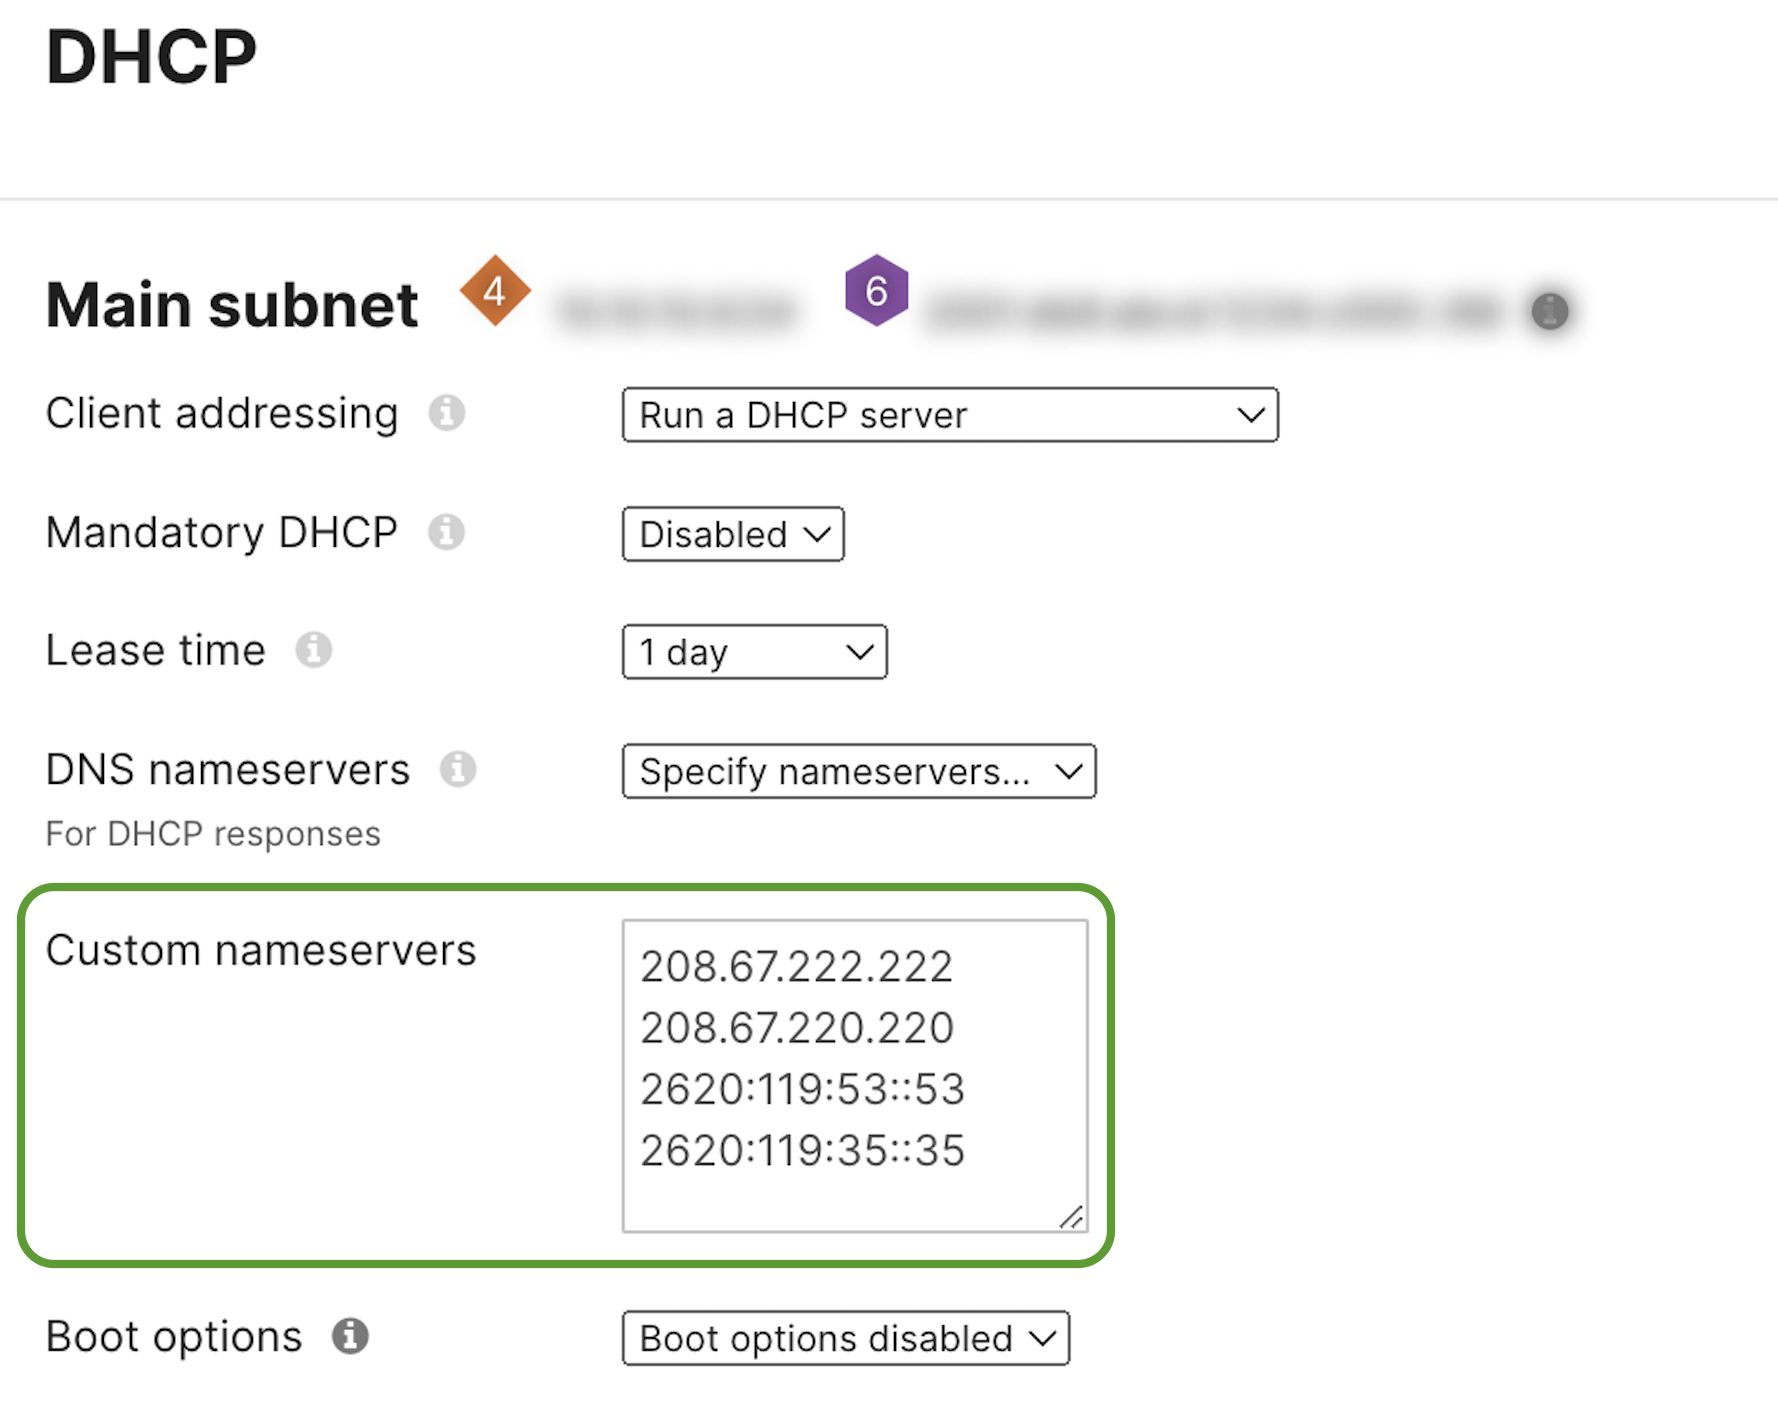 Go to Security & SD-WAN > Configure > DHCP page.  Input IPv6 address of your DNS sever in the the Custom nameservers field, this can be in addtion to any IPv4 DNS servers. 